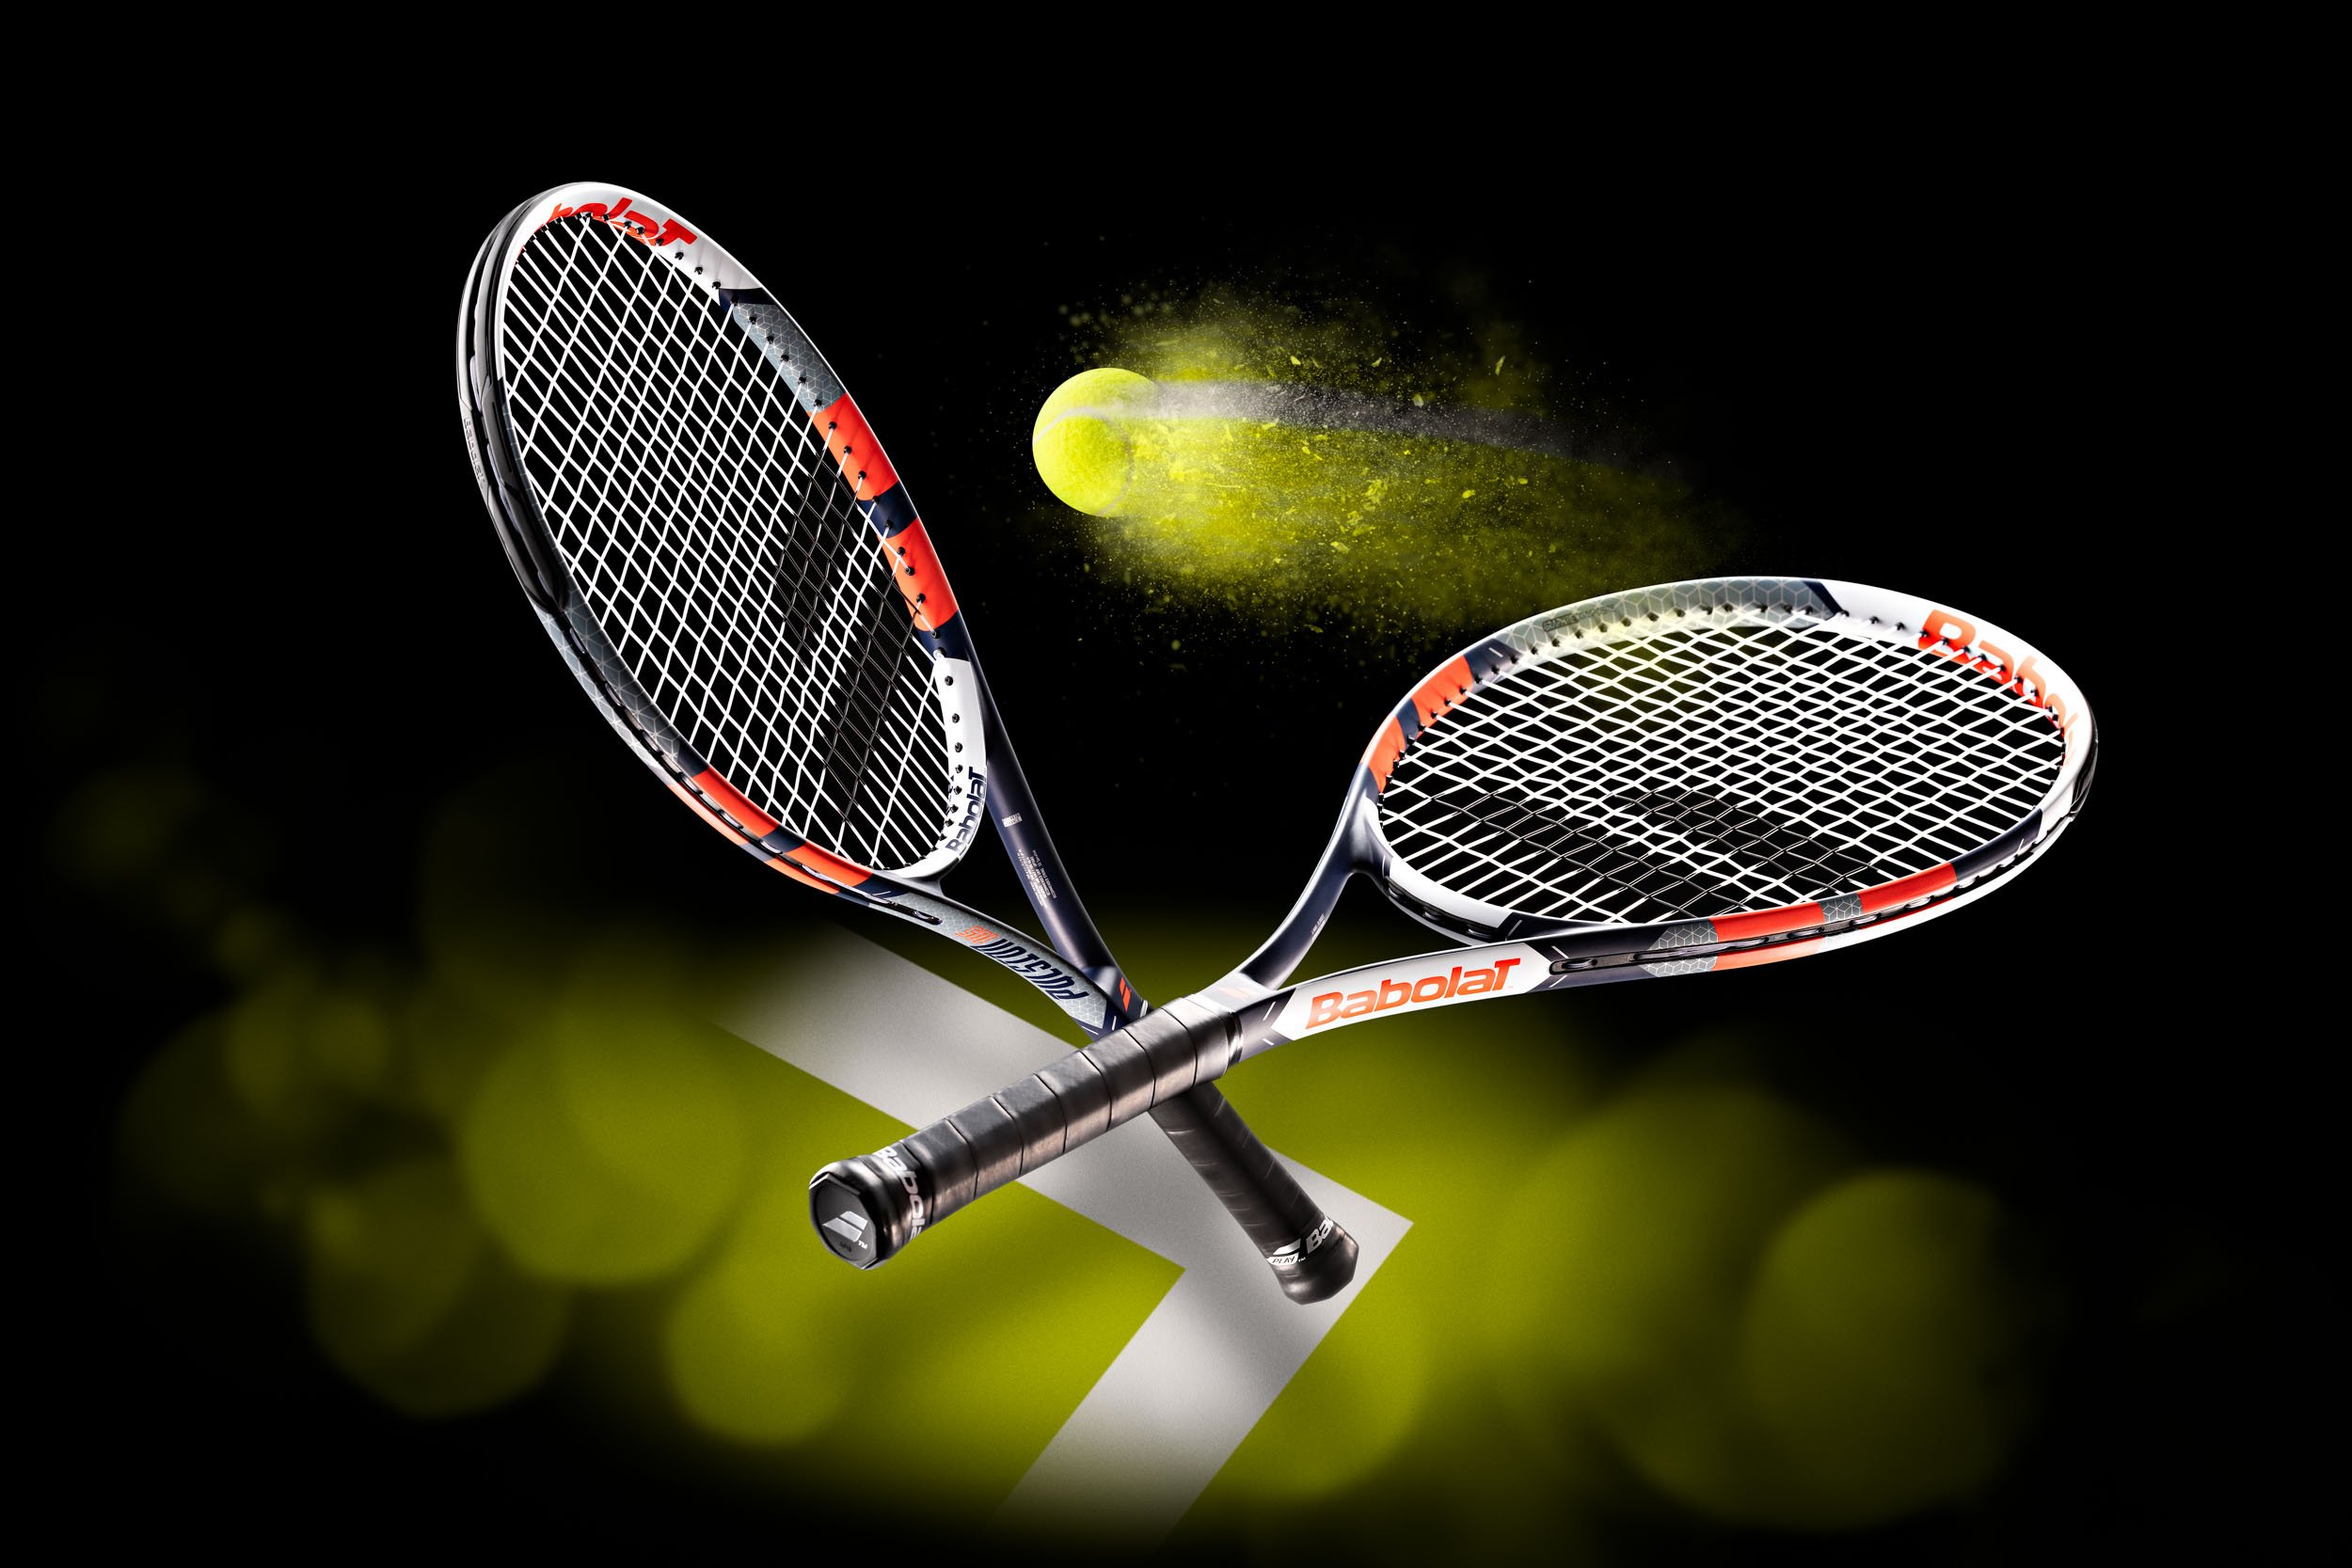 Babolat Tennis Racket | Commercial Product Shot